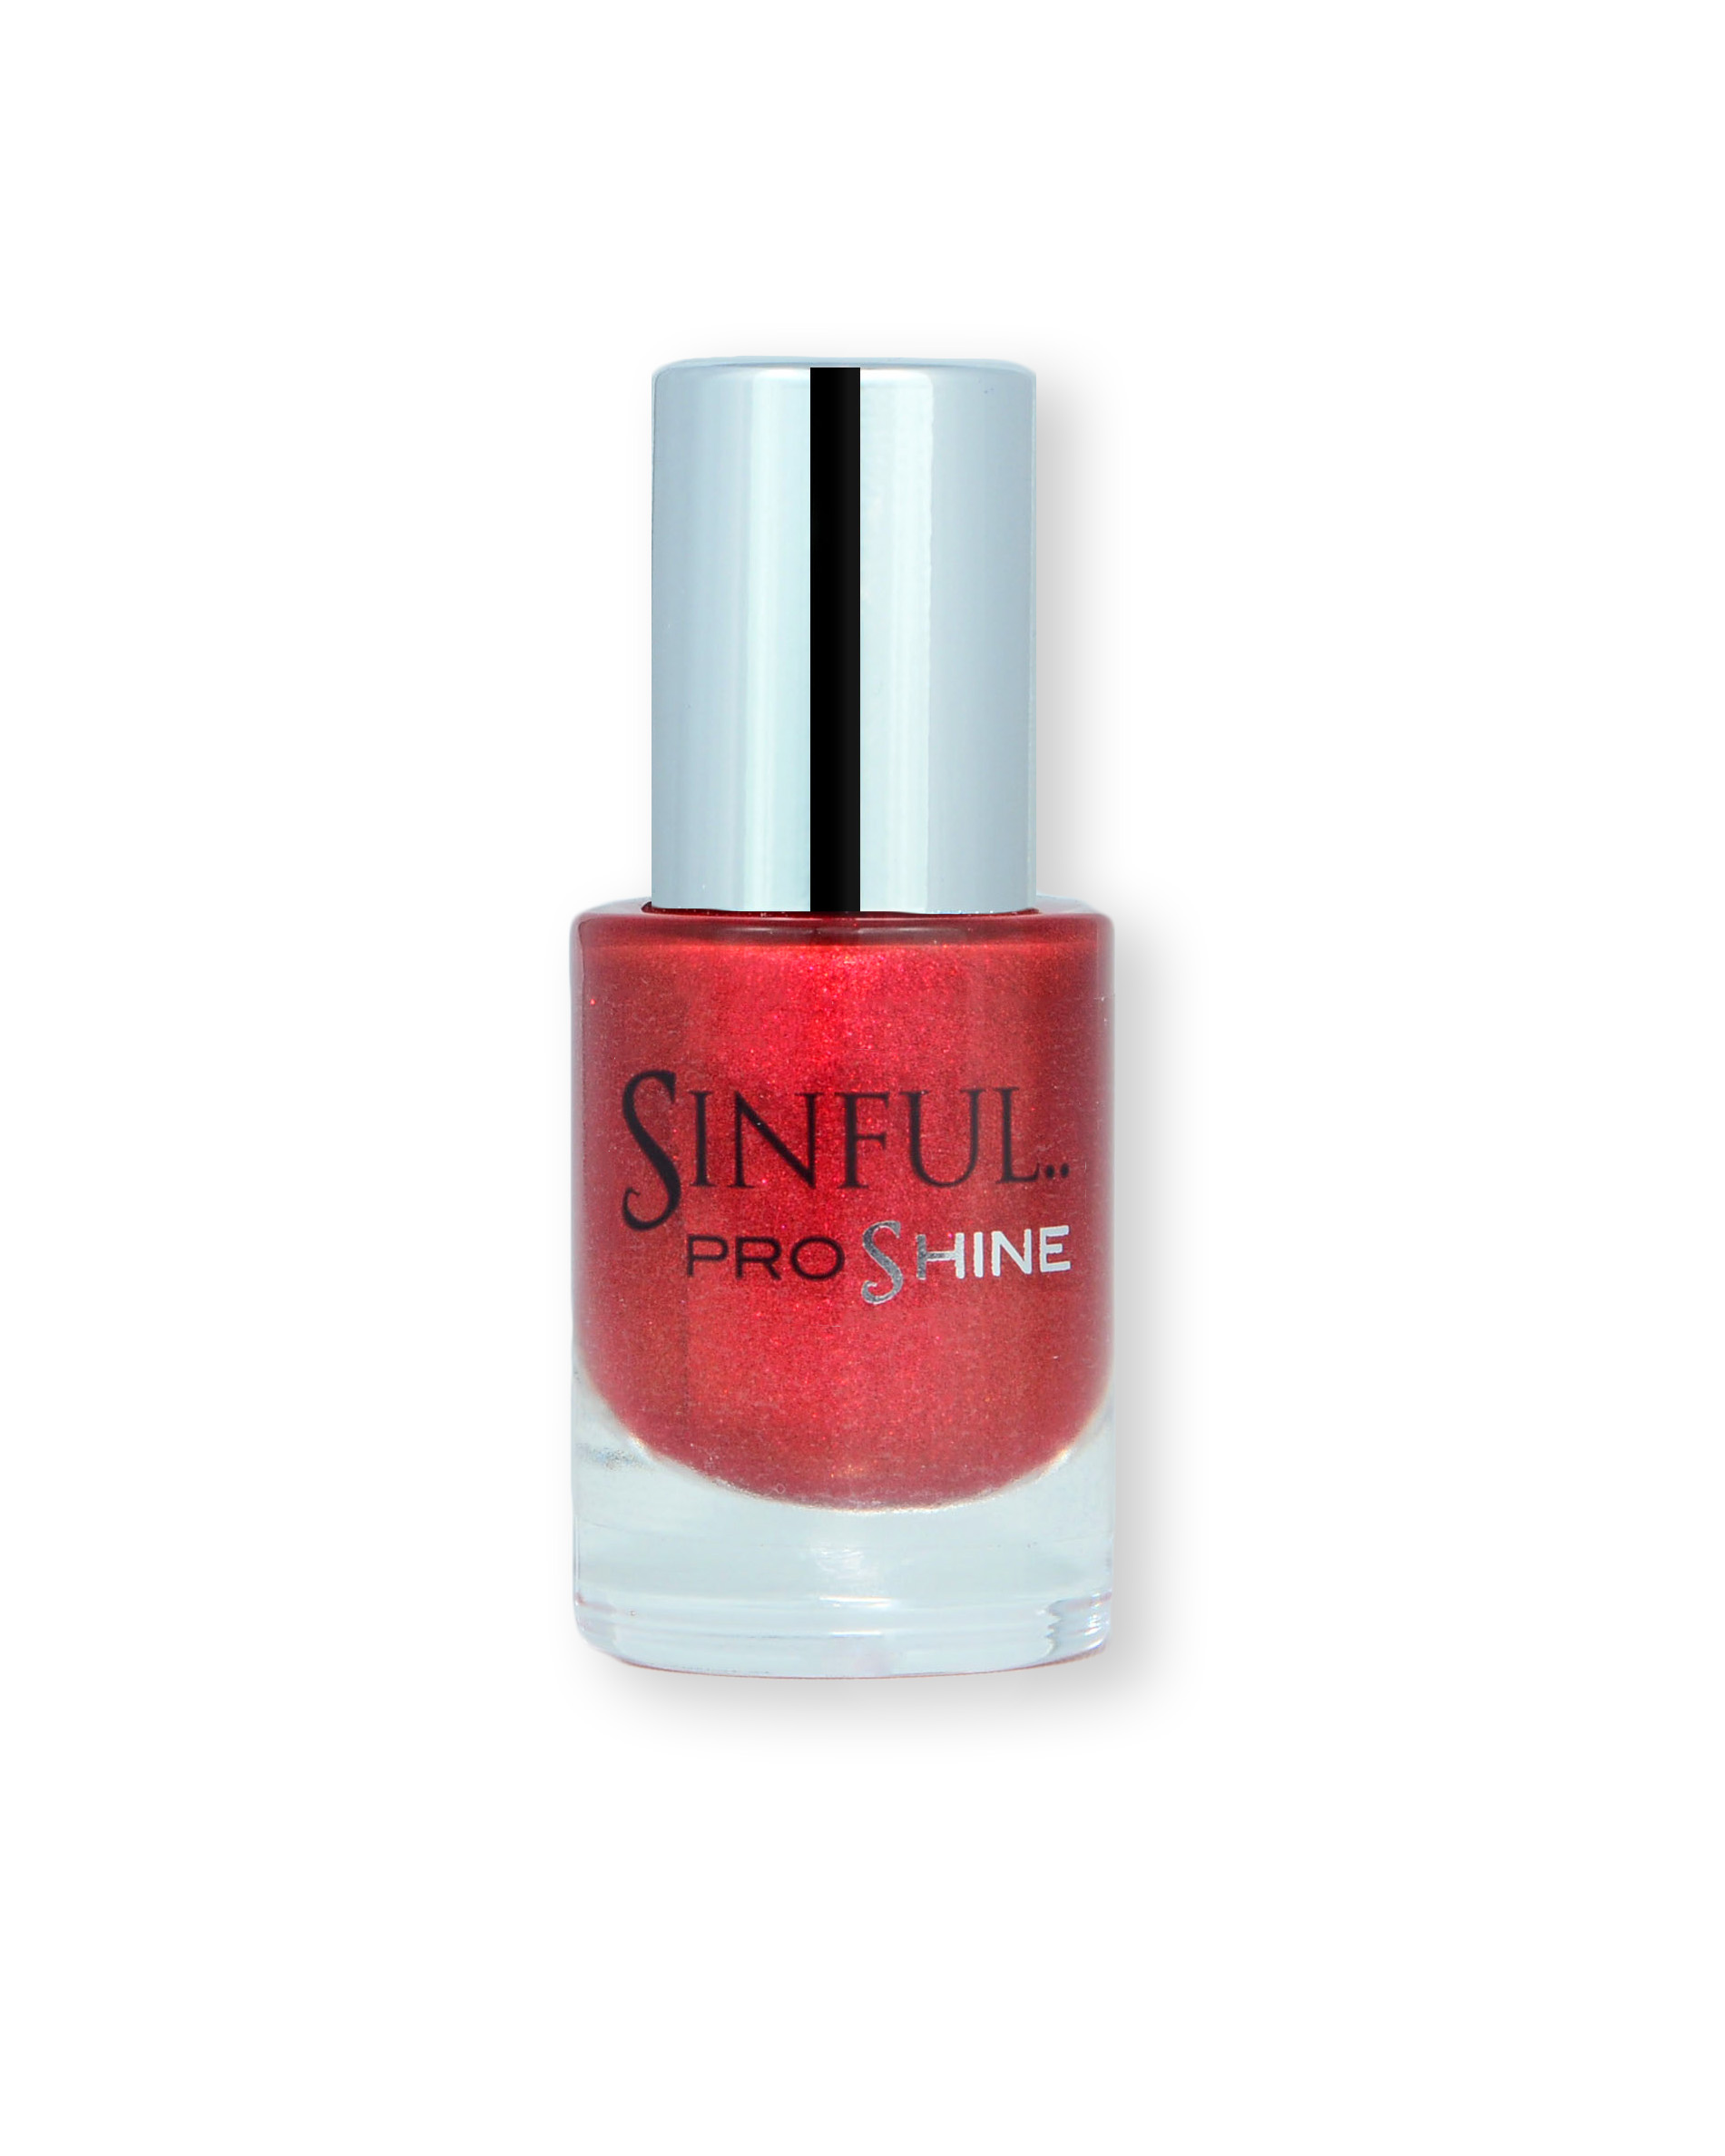 Sinful PROshine is a revolution into top spec imitation gel-like formula, easy application, full coverage and a sleek finish. Spoil yourself with the choice of 42 shades, expertly formulated with the finest grade of pigments. Devils Own: Cherry red with a dazzling pearl finish